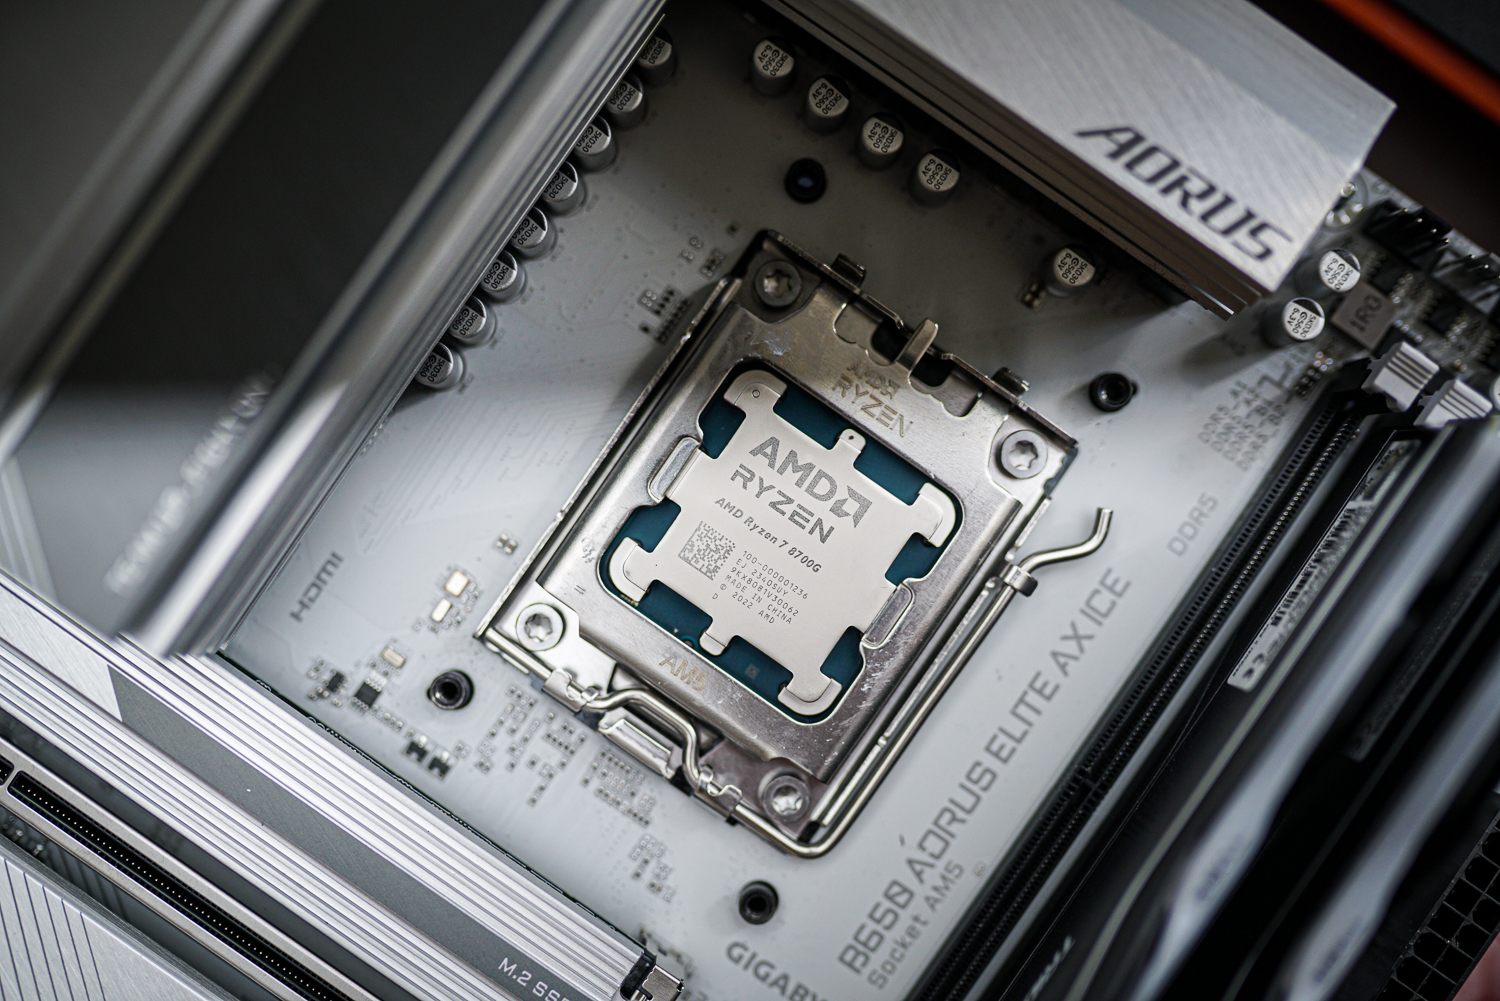 Intel Core i5-12600K Review: 5600X Defeated